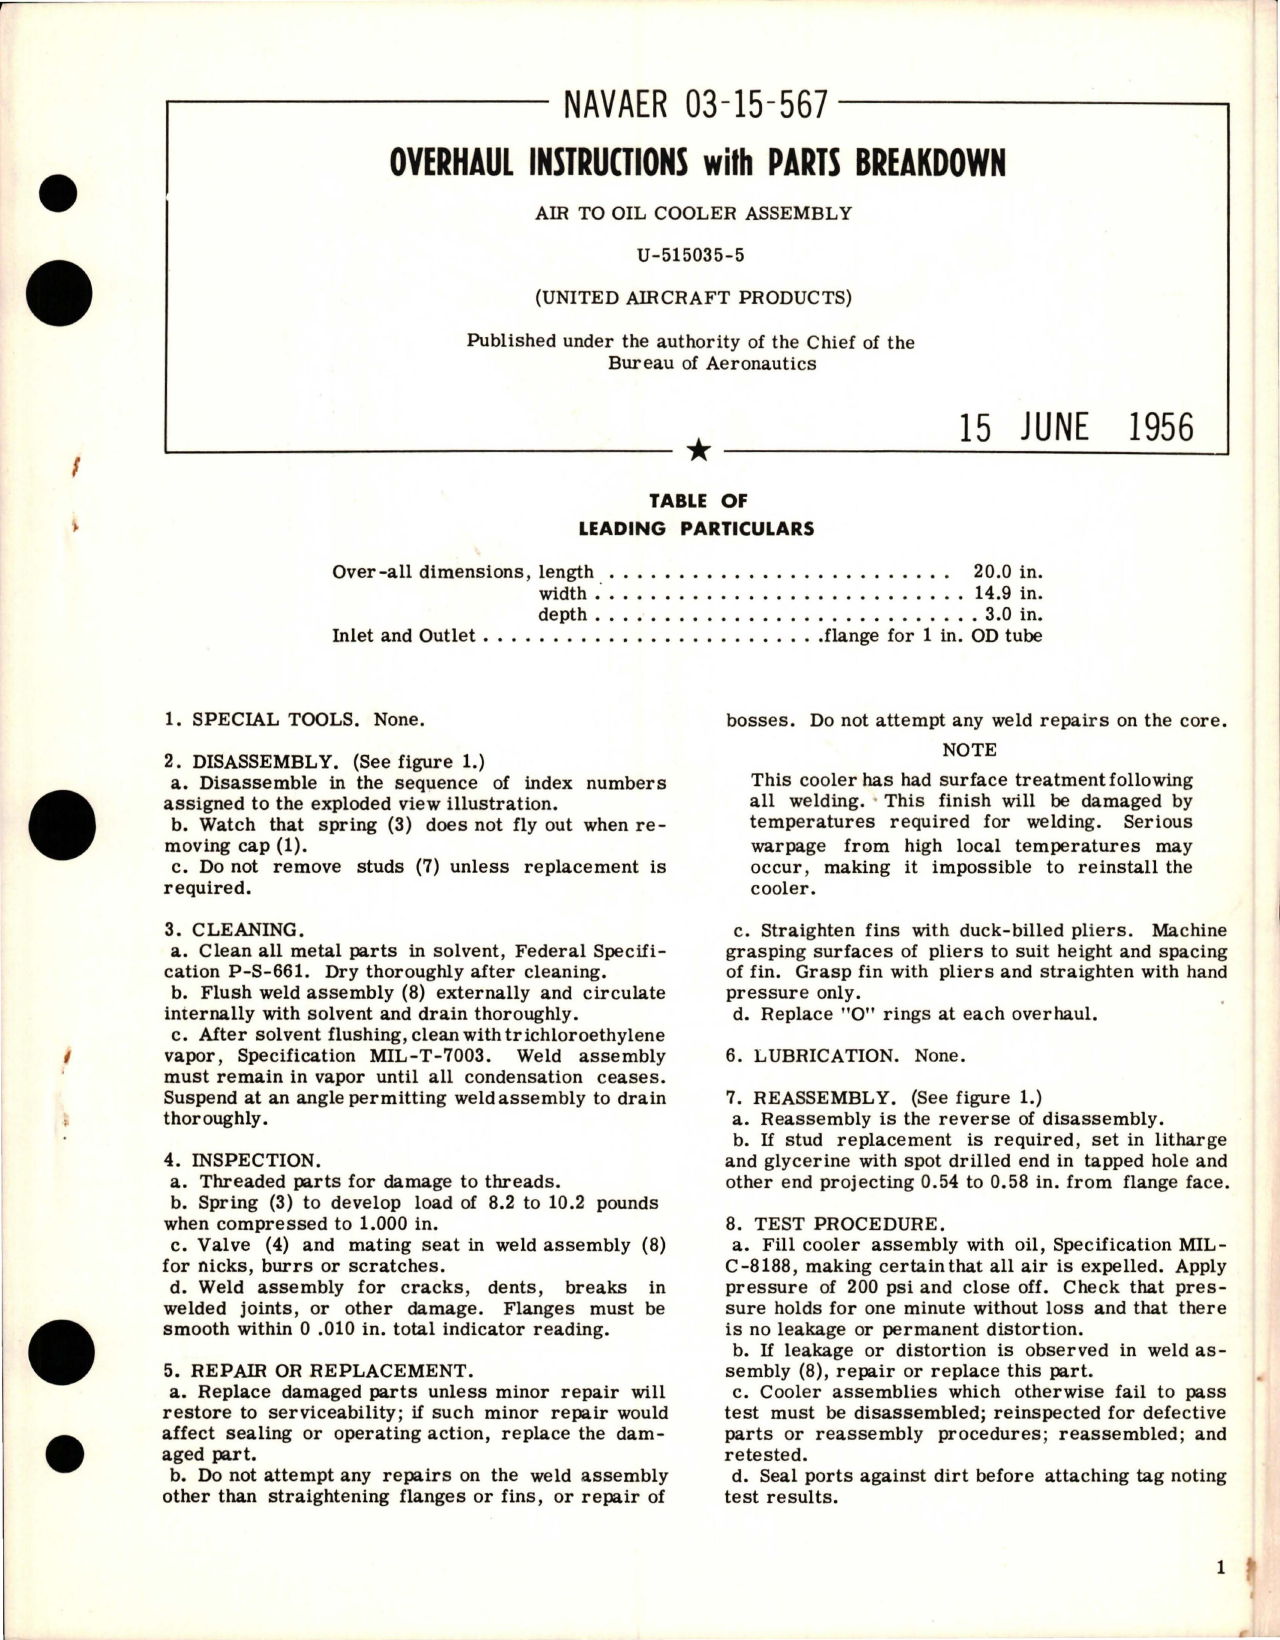 Sample page 1 from AirCorps Library document: Overhaul Instructions with Parts for Air to Oil Cooler Assembly - U-515035-5